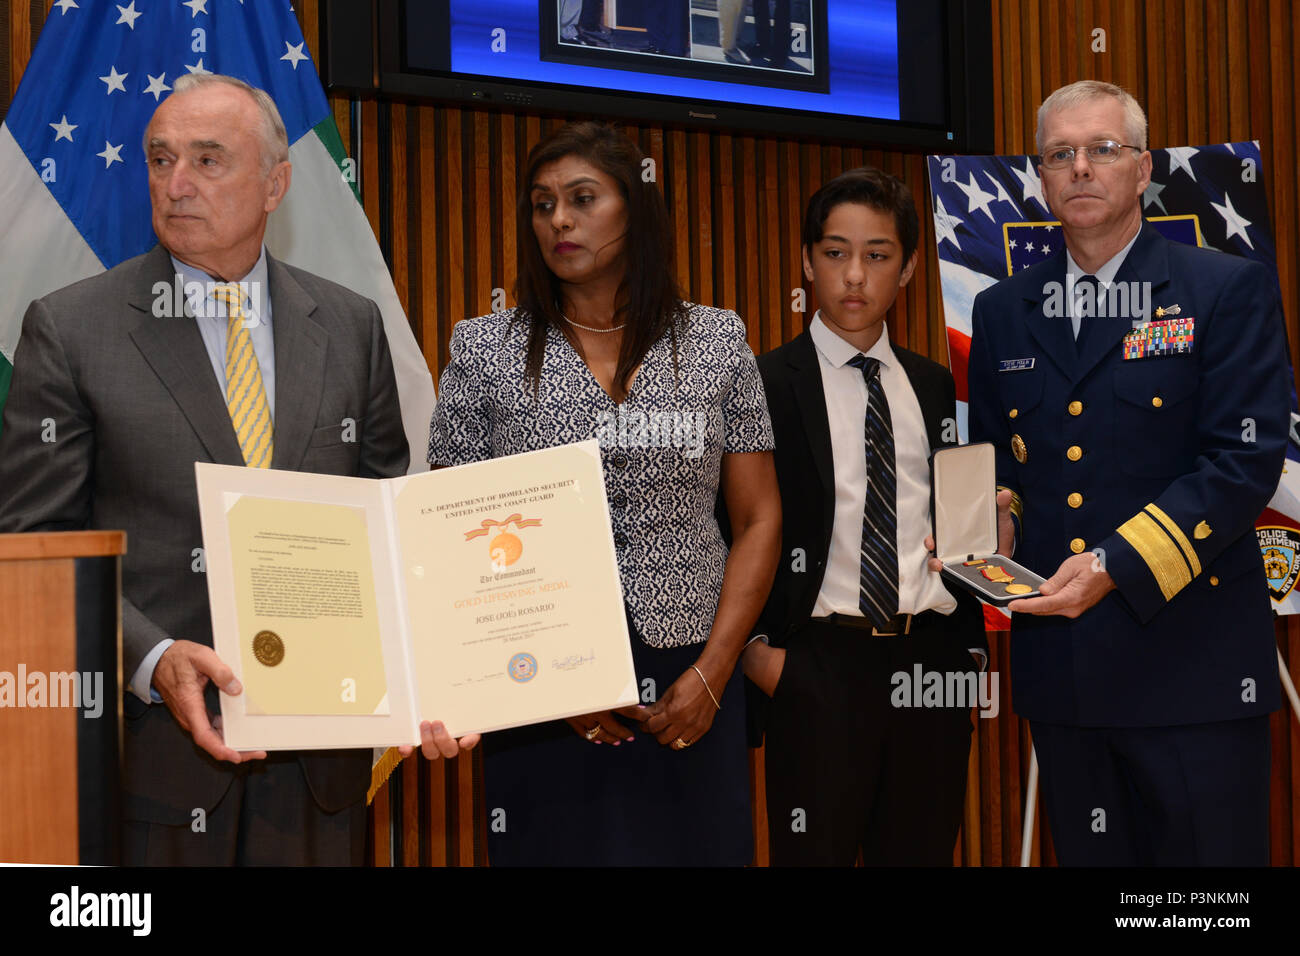 NEW YORK - Rear Adm. Steven Poulin, commander Coast Guard First District, and Hon. William Bratton, commissioner New York City Police Department, stand with Jose Rosario’s wife and son during the Gold Lifesaving Award presentation July 18, 2016, in New York City. The Coast Guard presented the award to Mr. Rosario’s family for his unselfish actions in March 2015, when he jumped in the rough waters off Puerto Rico to save the life of a child. (U.S. Coast Guard photo by Petty Officer 3rd Class Steve Strohmaier) Stock Photo